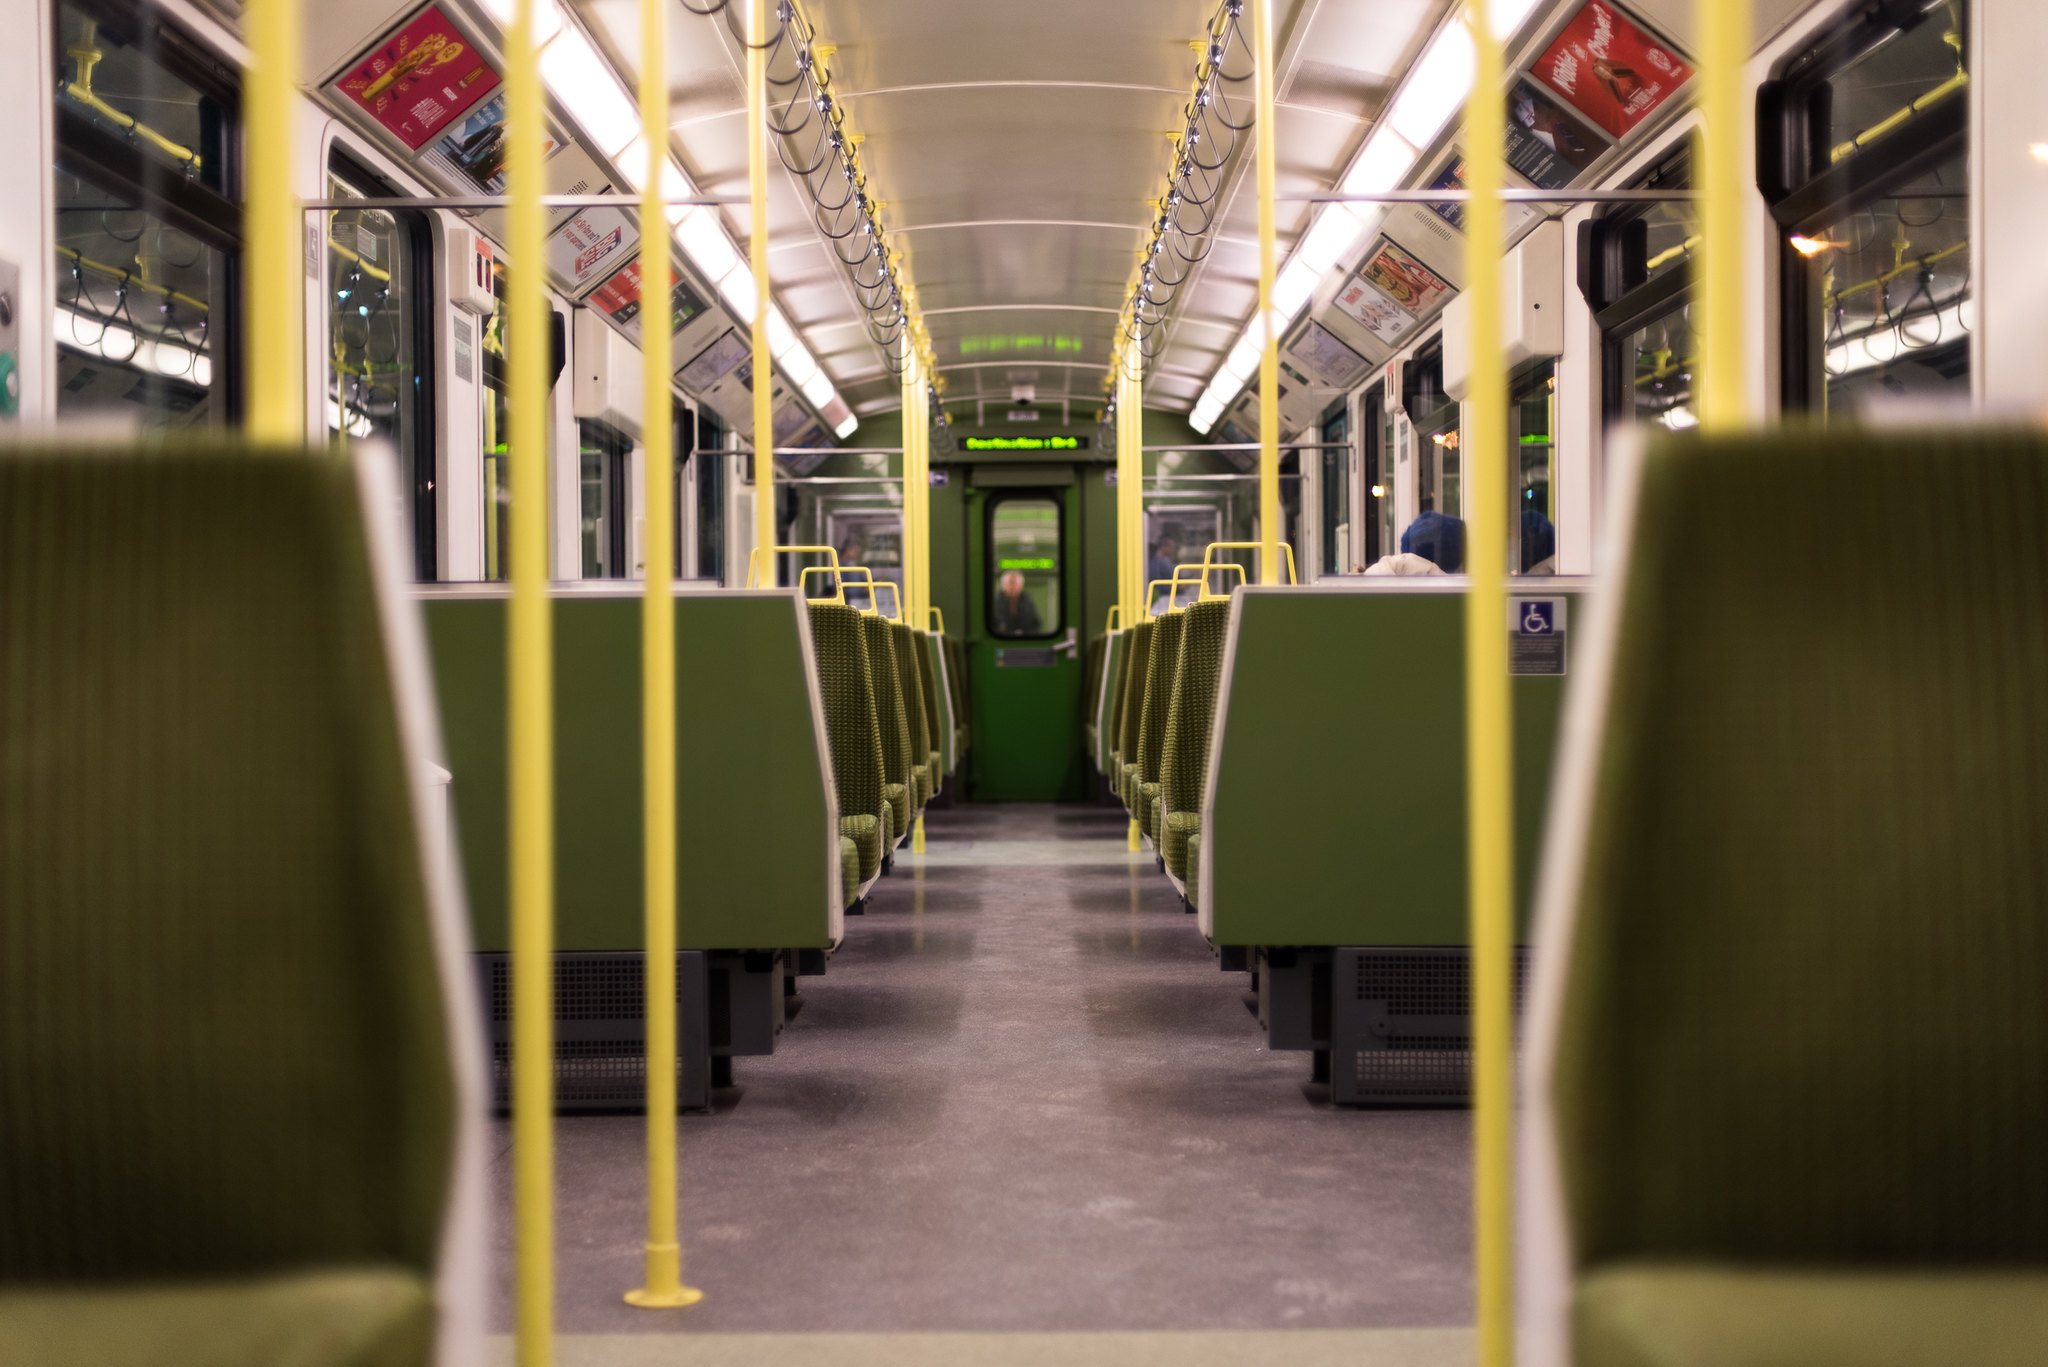 Seats in a train | Source: Flickr